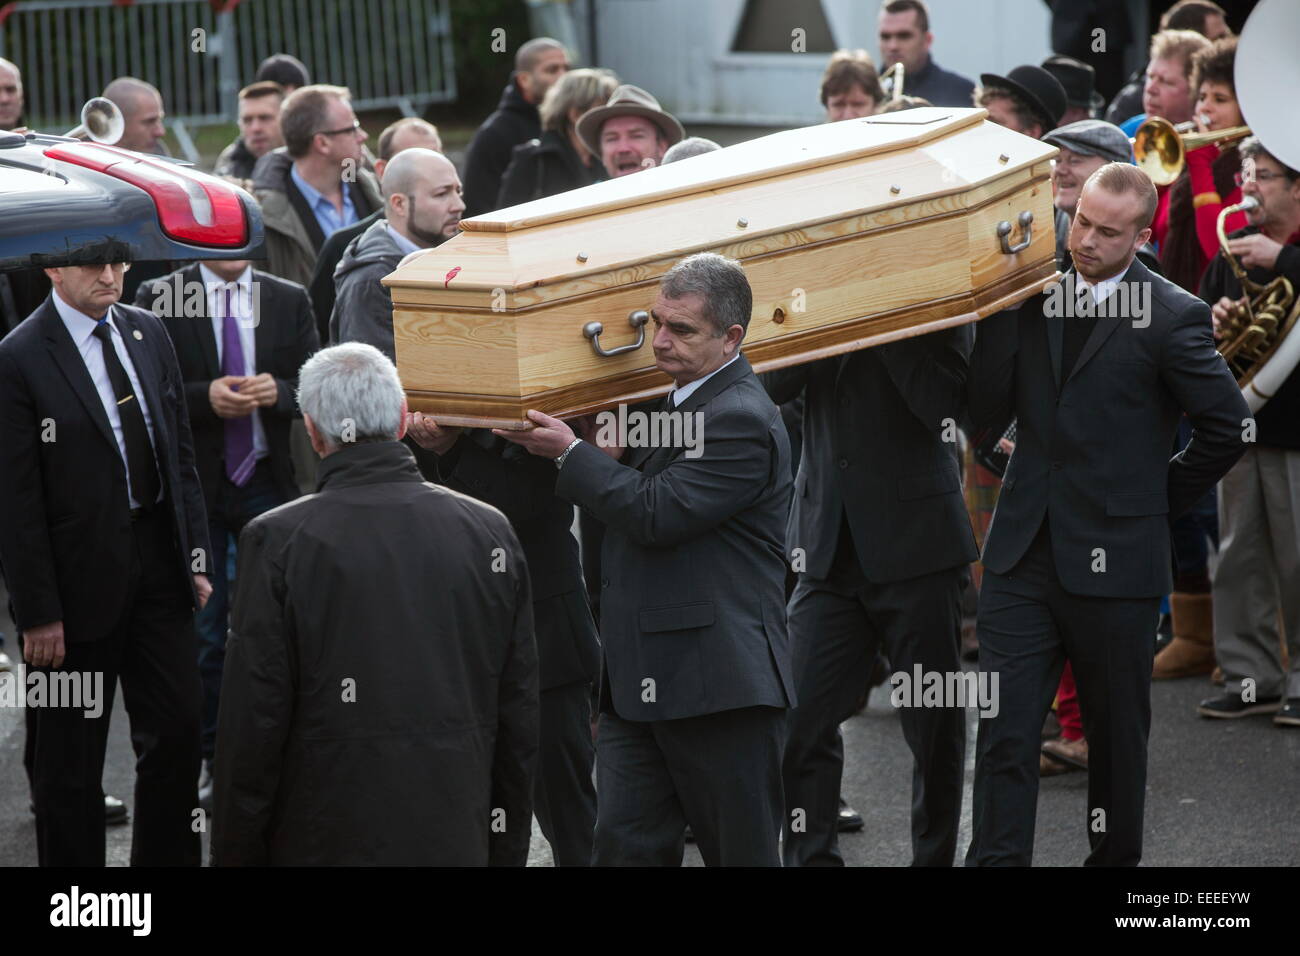 (150116) -- PARIS, Jan. 16, 2015 (Xinhua) -- Pallbearers carry the casket of slain Charlie Hebdo editor-in-chief Stephane Charbonnier (who publishes under the pen name Charb) during his funeral in Pontoise, outside Paris, Jan. 16, 2015.   (Xinhua/Jose Rodriguez) Stock Photo